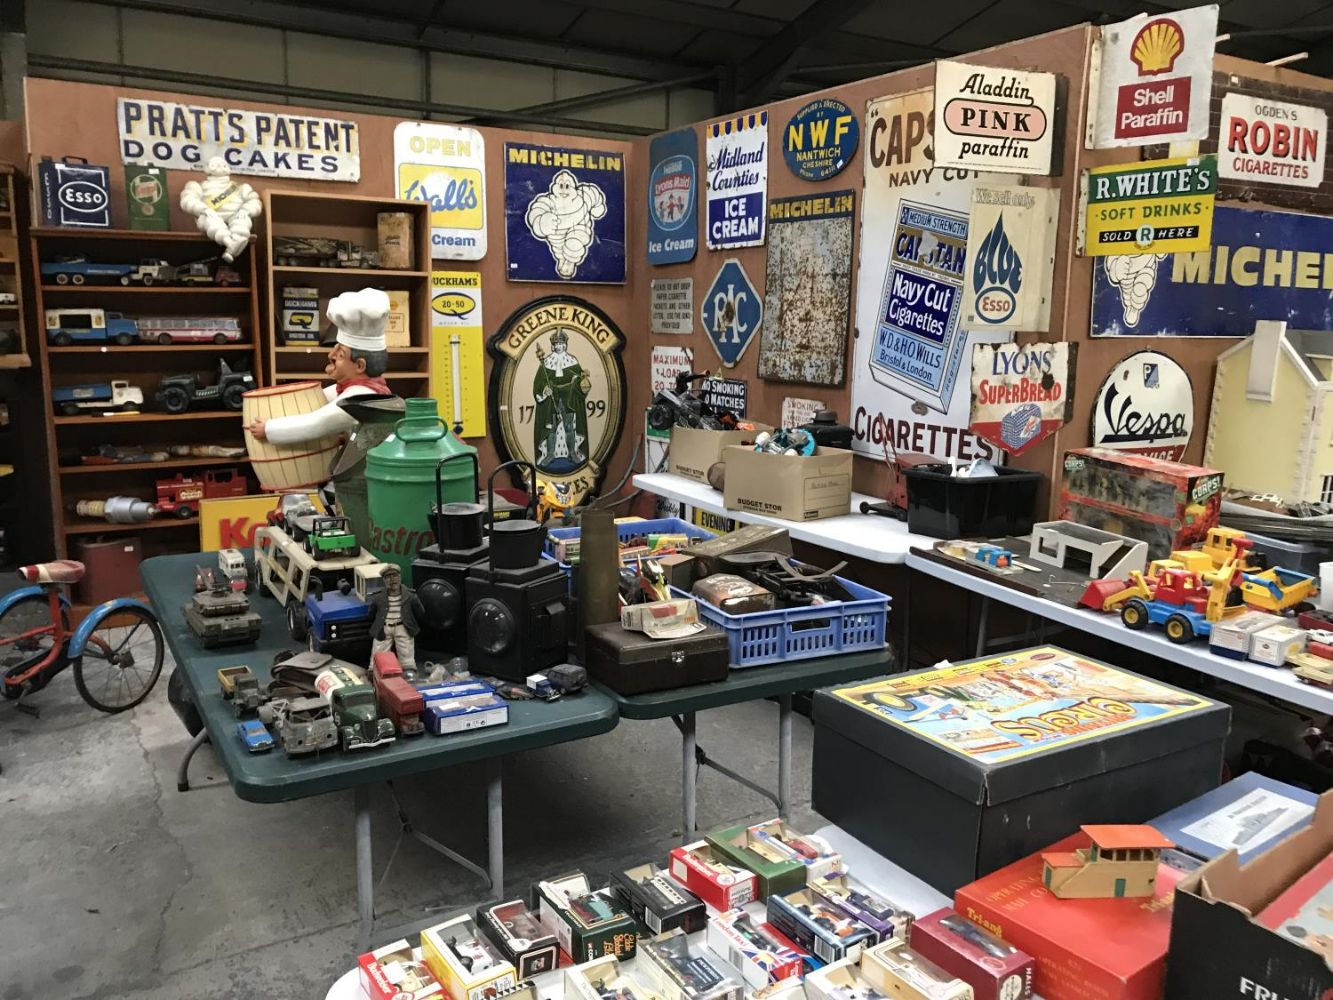 TWO DAY AUCTION OF COLLECTABLES, ANTIQUES, JEWELLERY, FURNITURE, VINTAGE ITEMS, TOOLS ETC. INCLUDING A  SPECIAL SALE OF COLLECTABLE TOYS